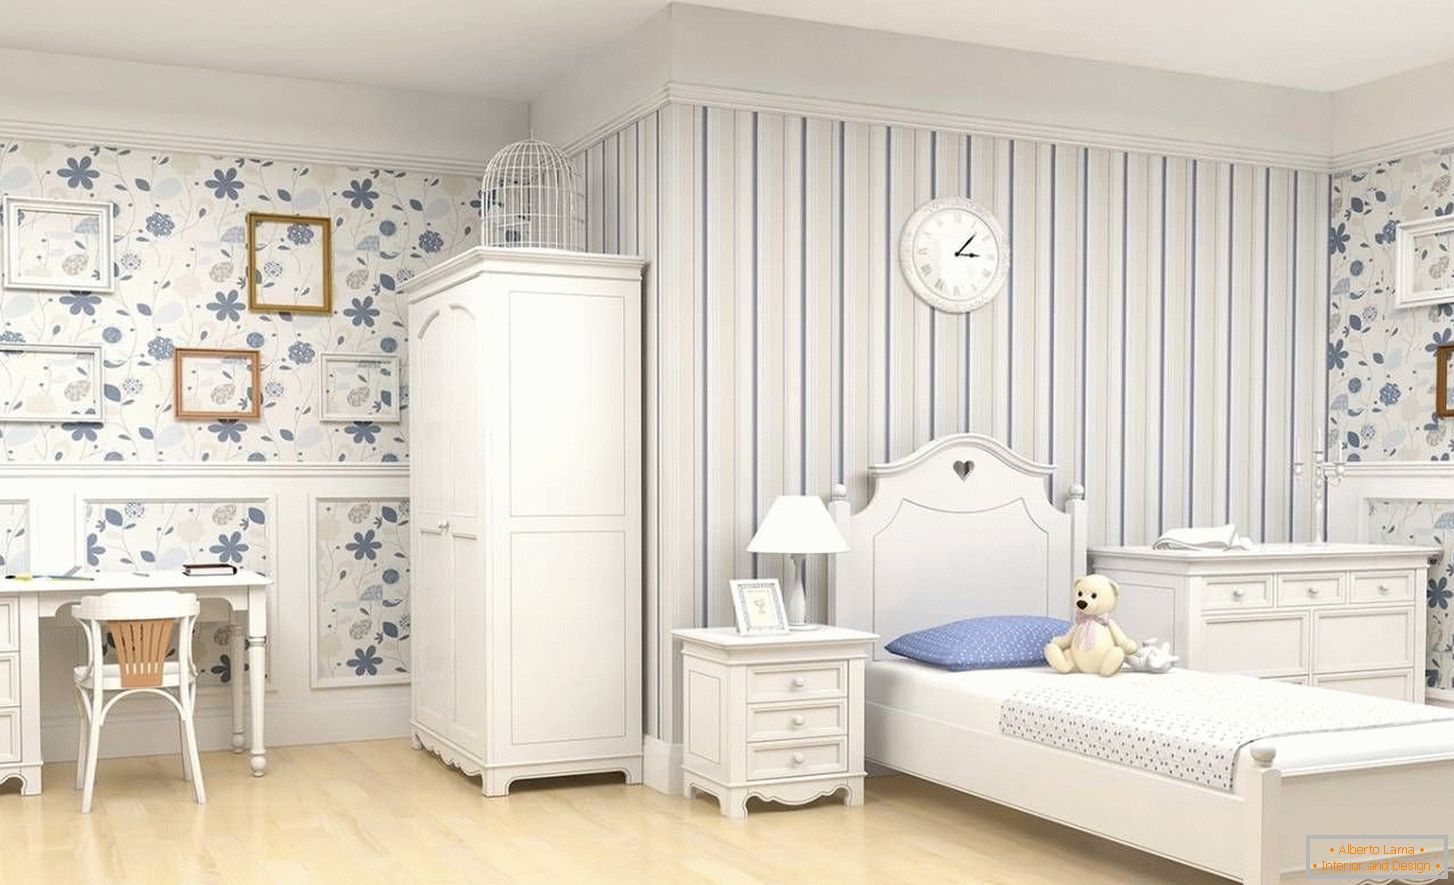 Light blue and white room for a girl